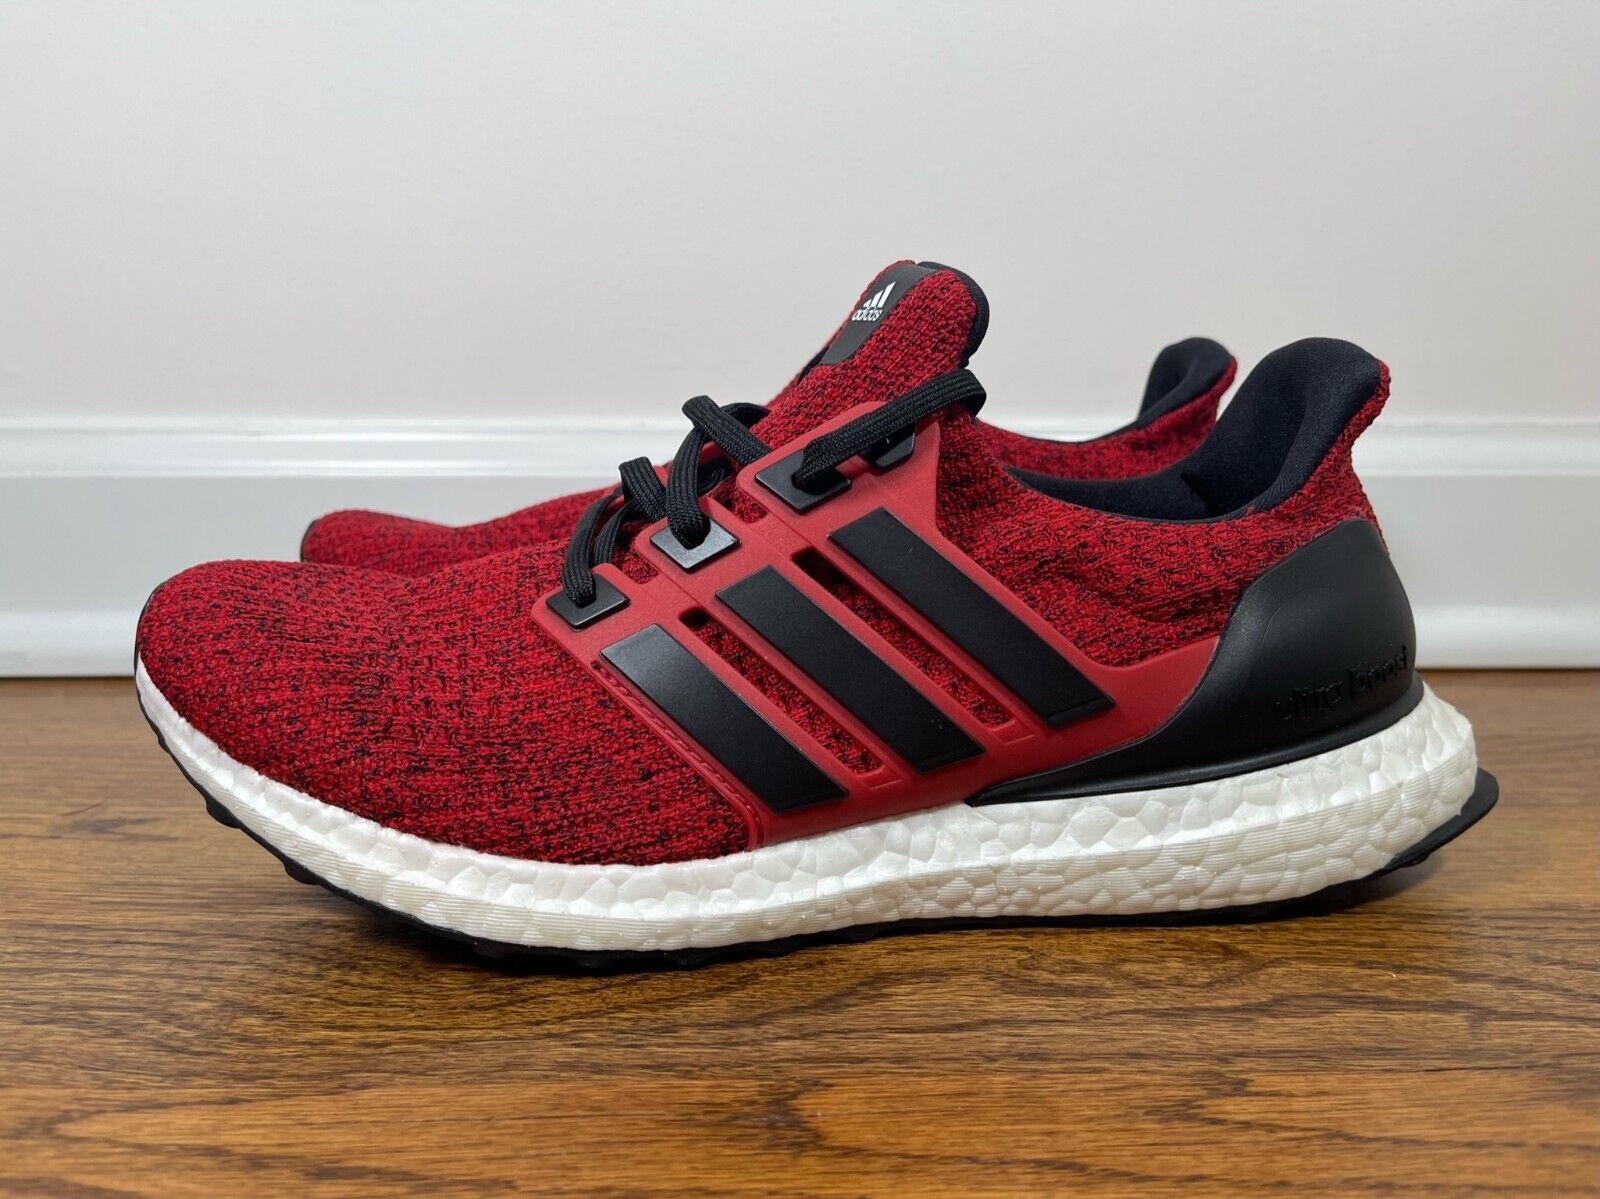 NEW Adidas Ultra Boost 4.0 Red Black EE3703 Sz 9 SHIP NOW